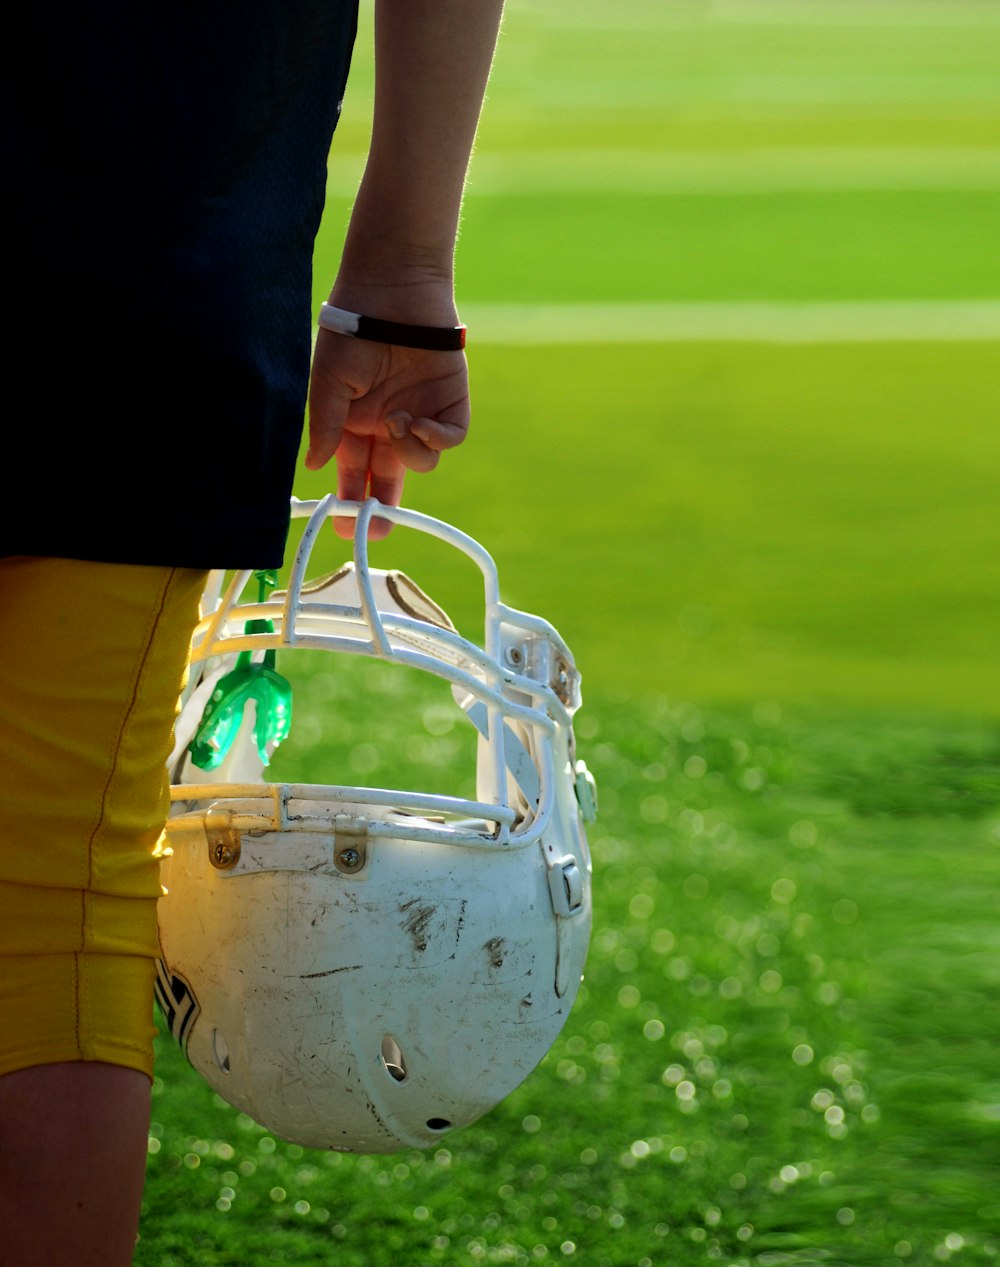 shallow focus photography of football player holding helmet